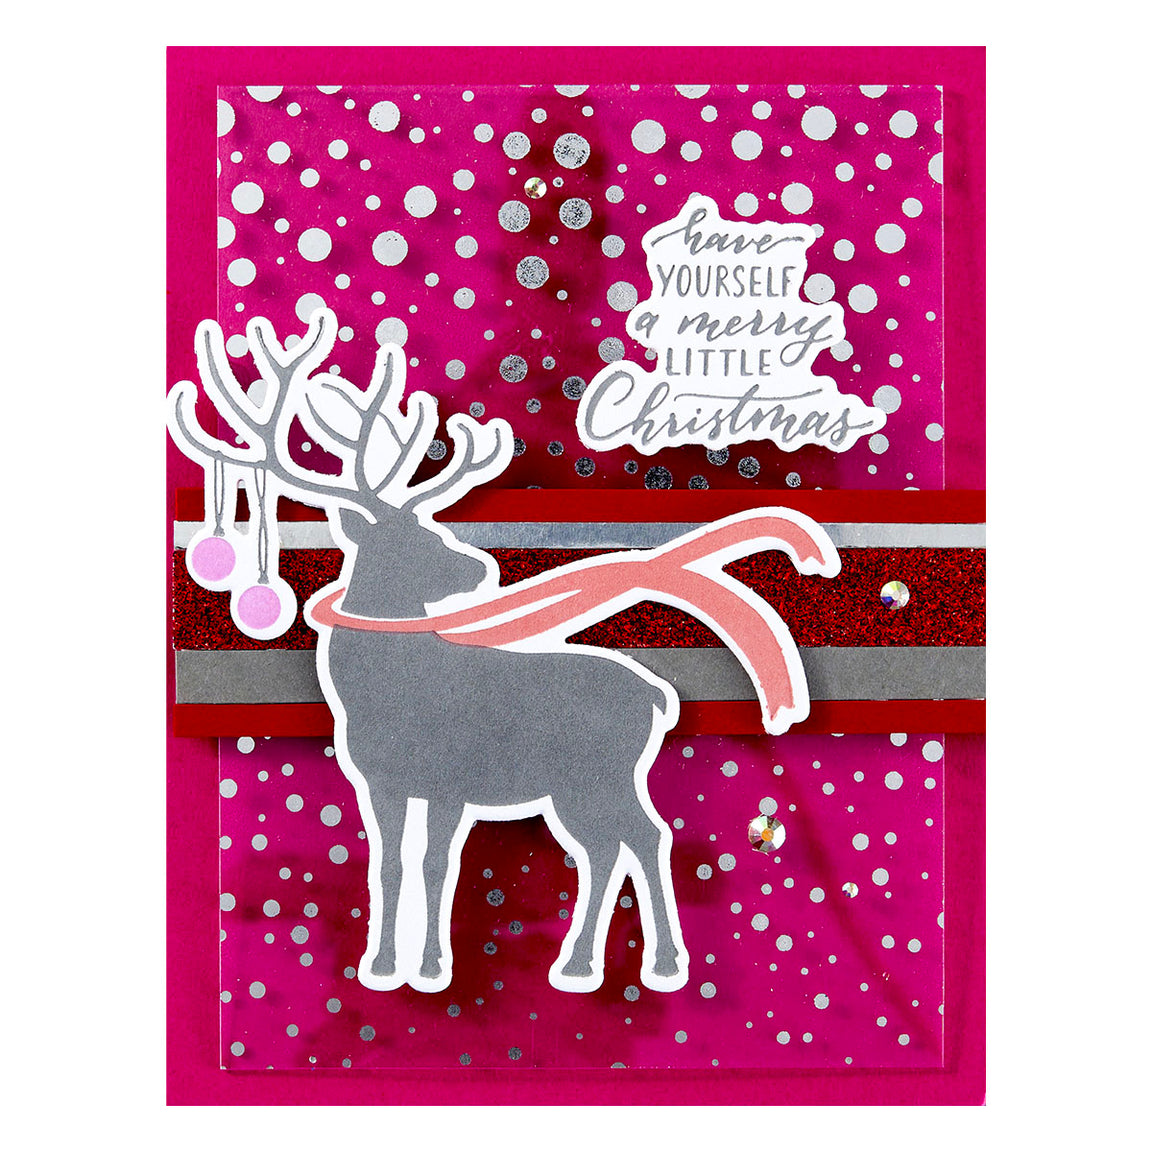 Spellbinders Dashing Reindeer Registration Press Plate & Die Set - Home for the Holidays Collection